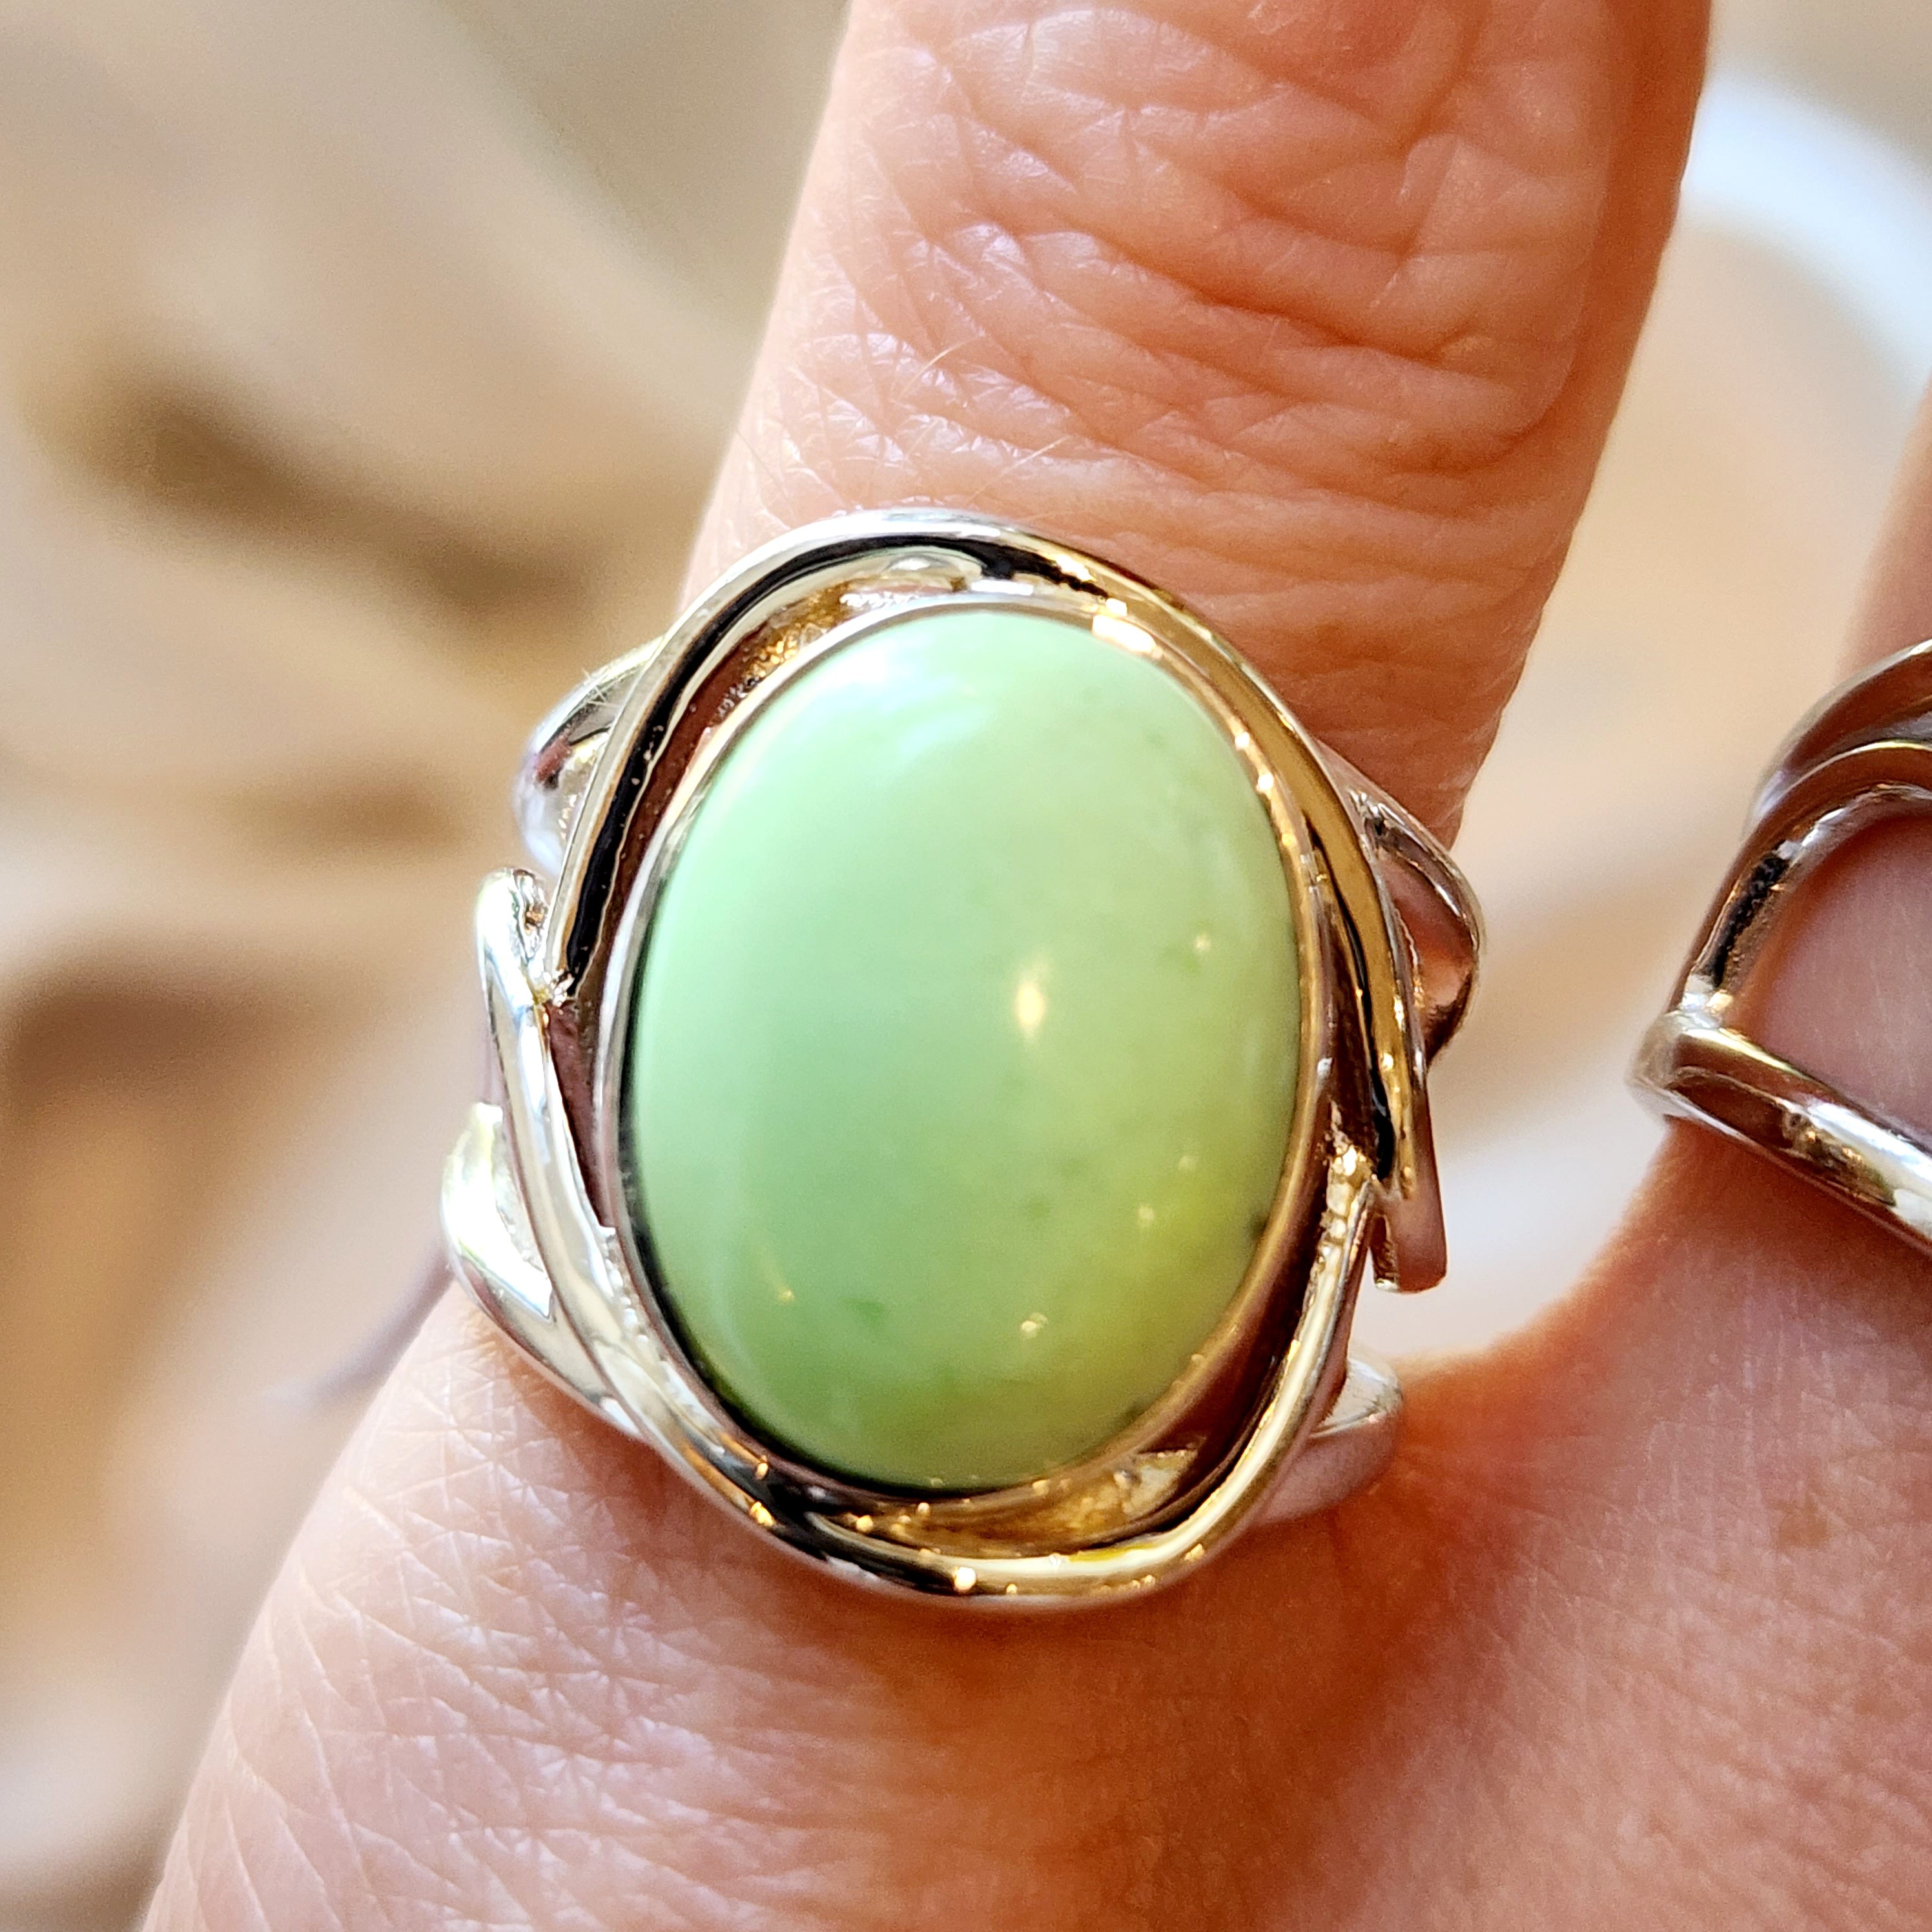 Citron Chrysoprase Finger Cuff Adjustable Ring .925 Sterling Silver for Compassion, Joy and Kindness